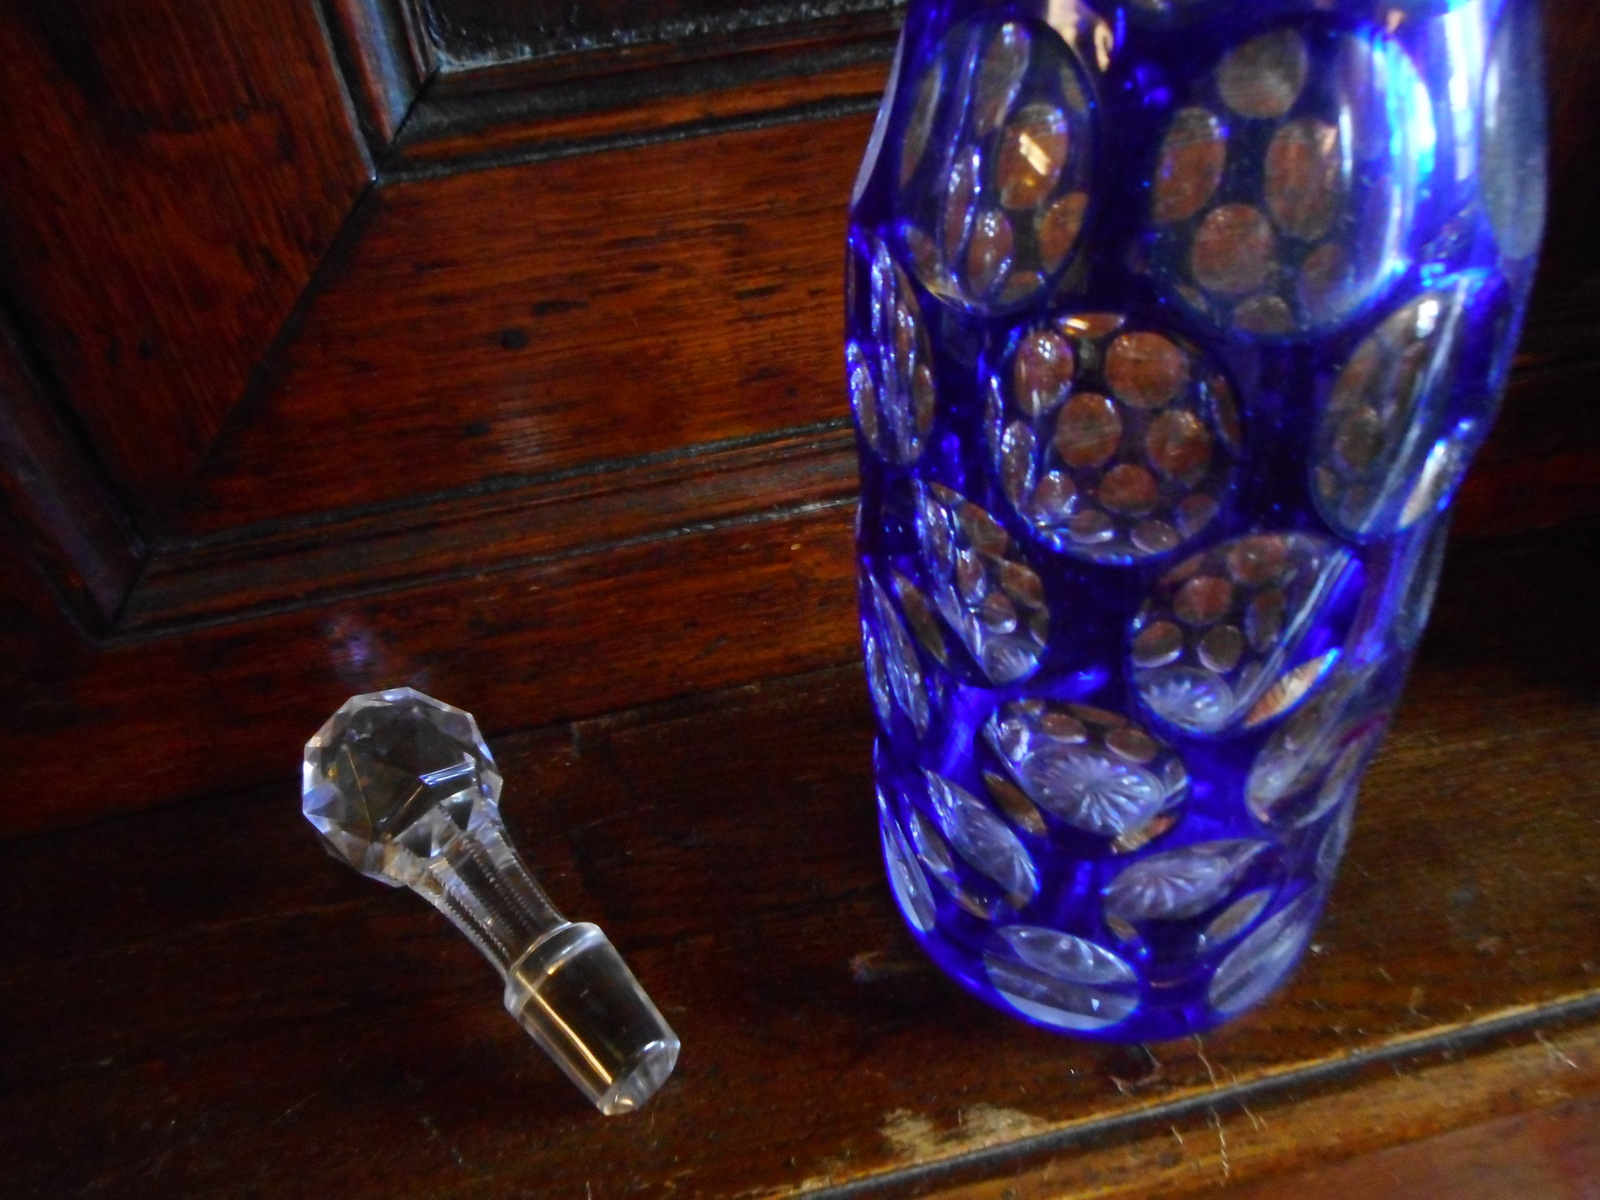 19th century Bohemian decanter blue cut to clear glass